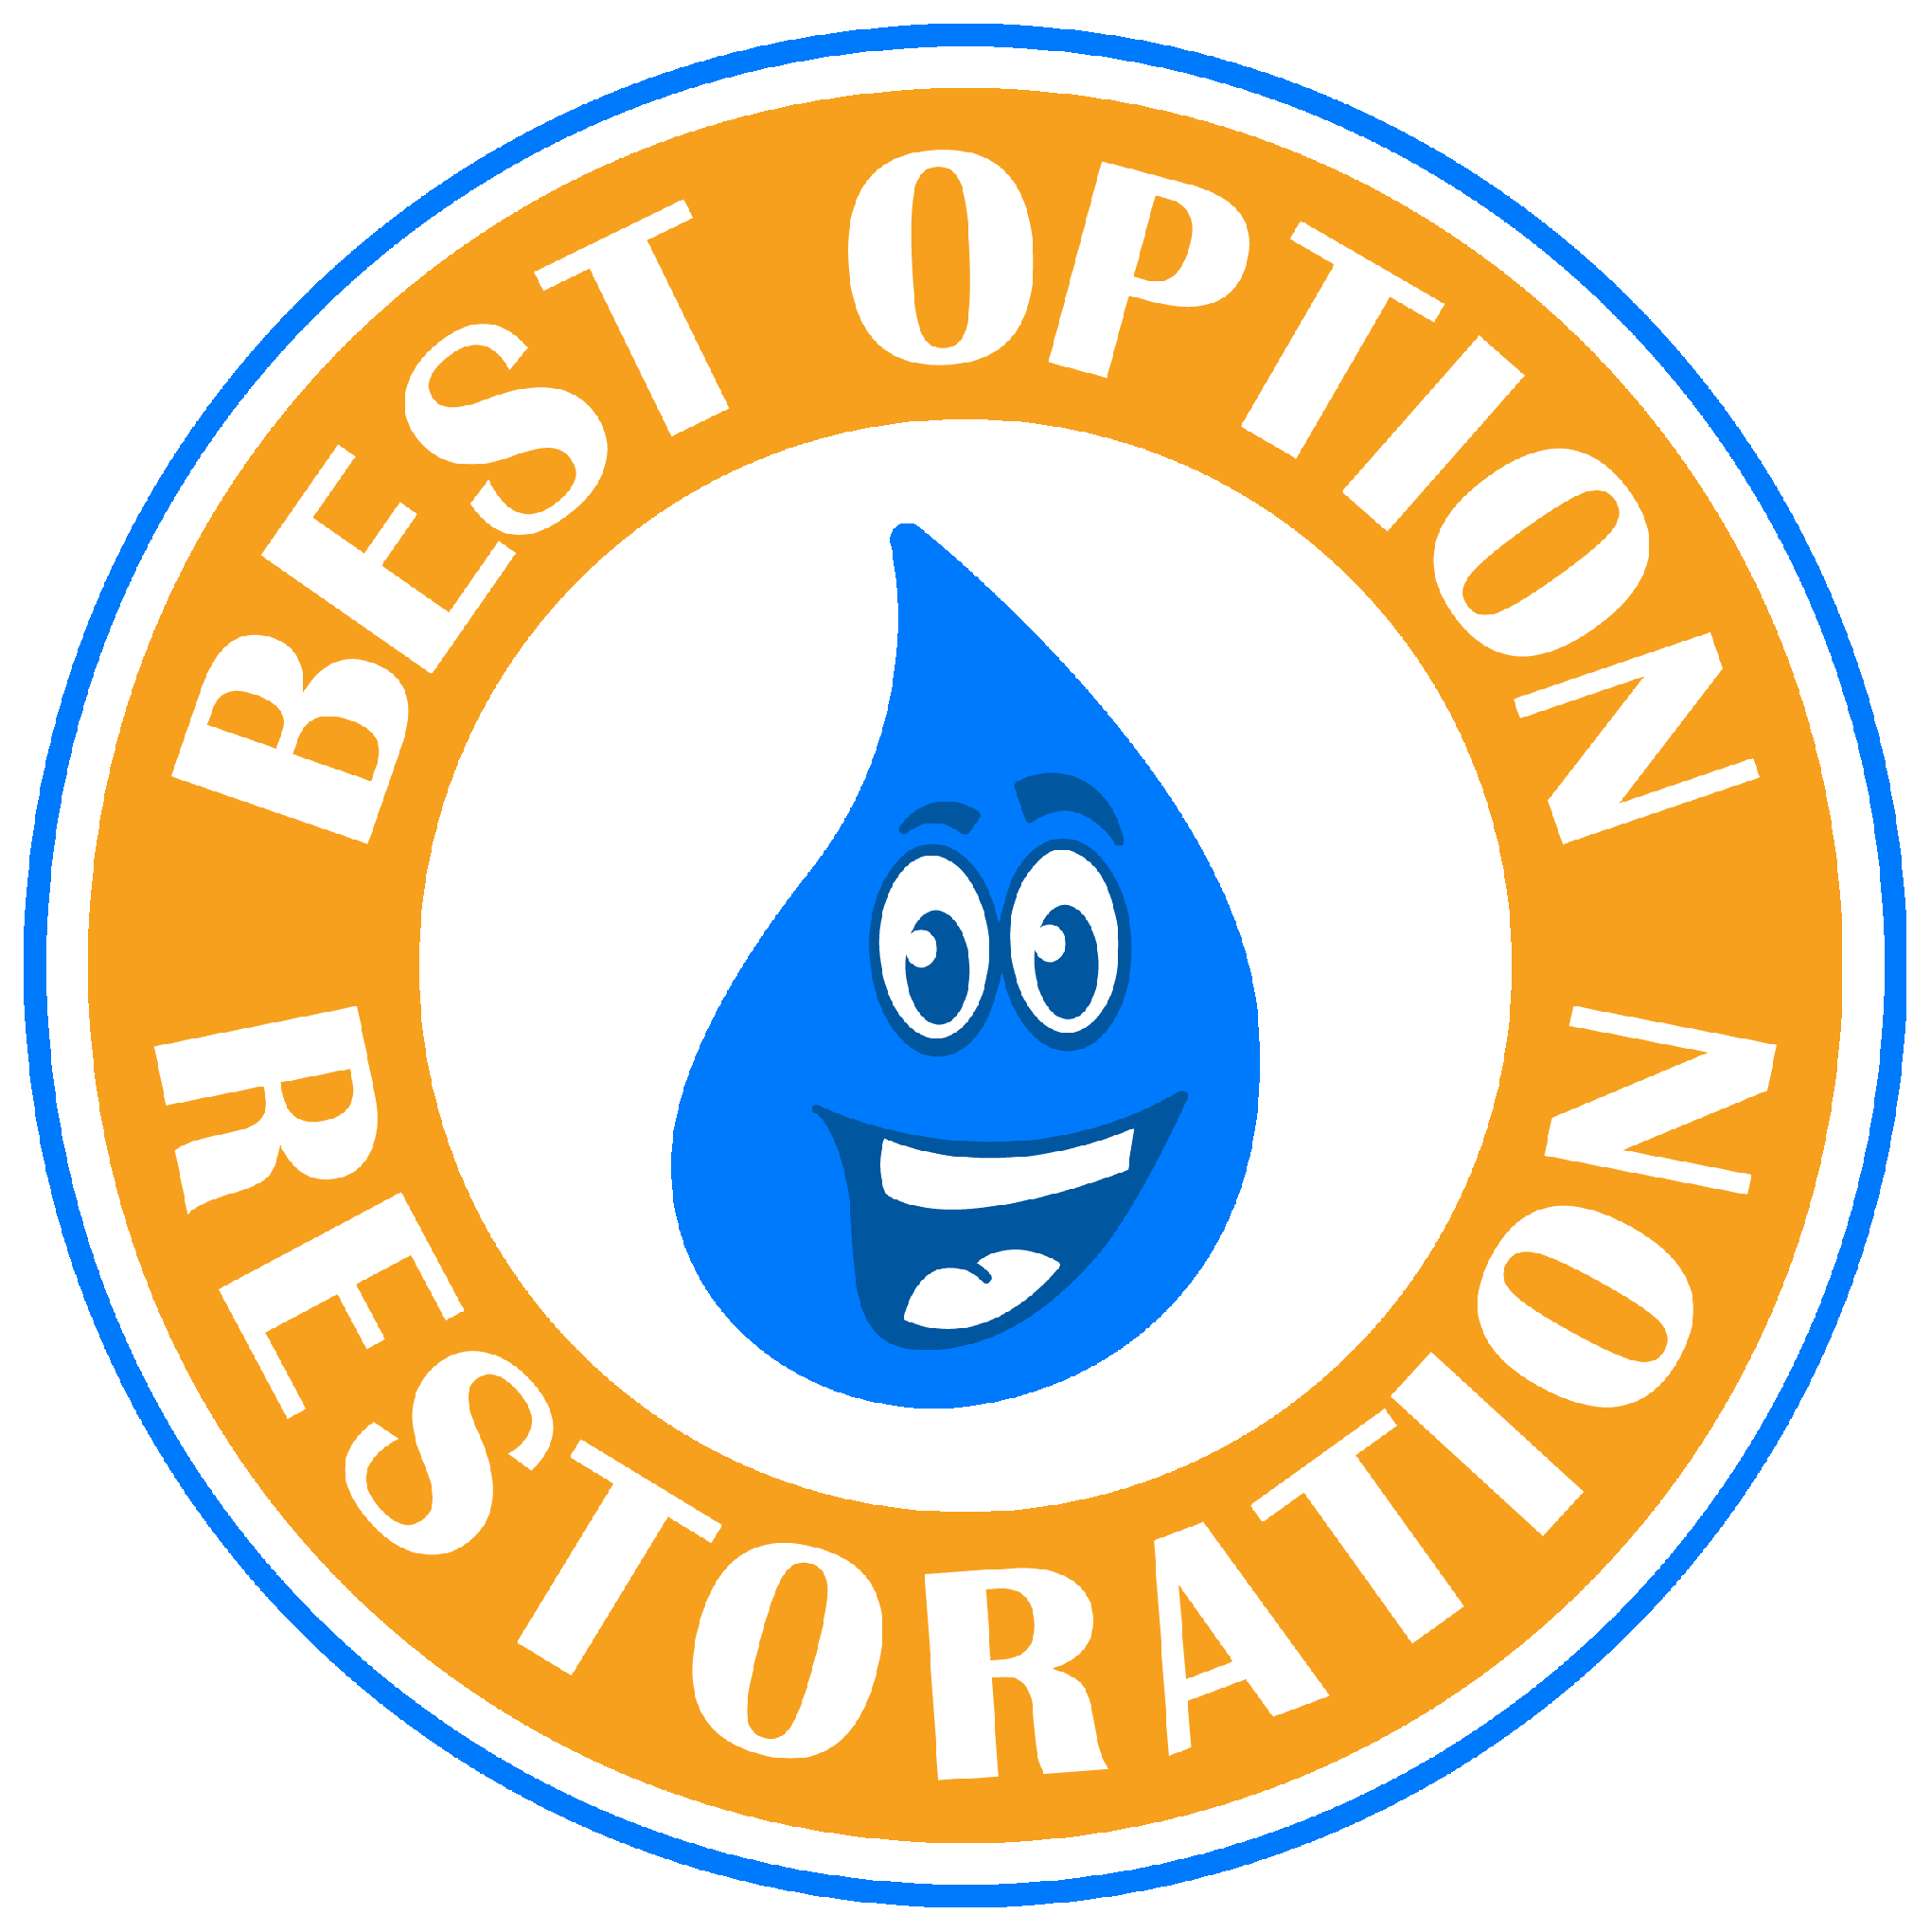 Emergency Restoration and Cleanup Services in North Houston, TX